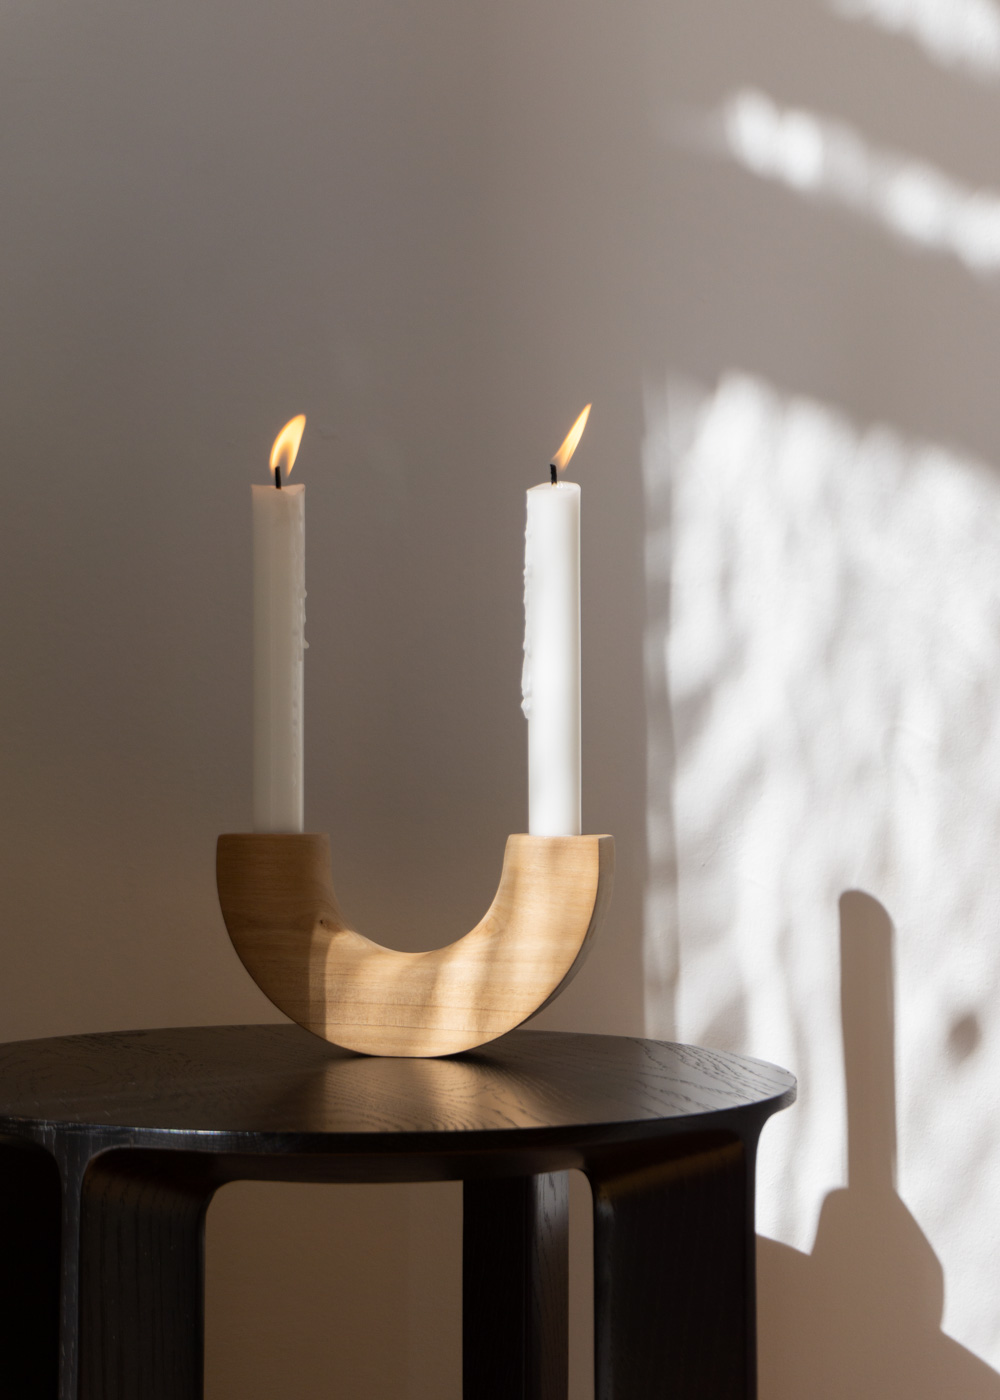 Foresta Arco Candle Holder, Beige ~ Table Setting, Slow Living, Simple For Everyday, Ethical Sustainable Brand, Fair Trade Design | Minimalist Home, Scandinavian Design, Sustainable Home, Natural Aesthetic | Product Photography, Light and Shadows, Danish Design Interior | RG Daily Blog